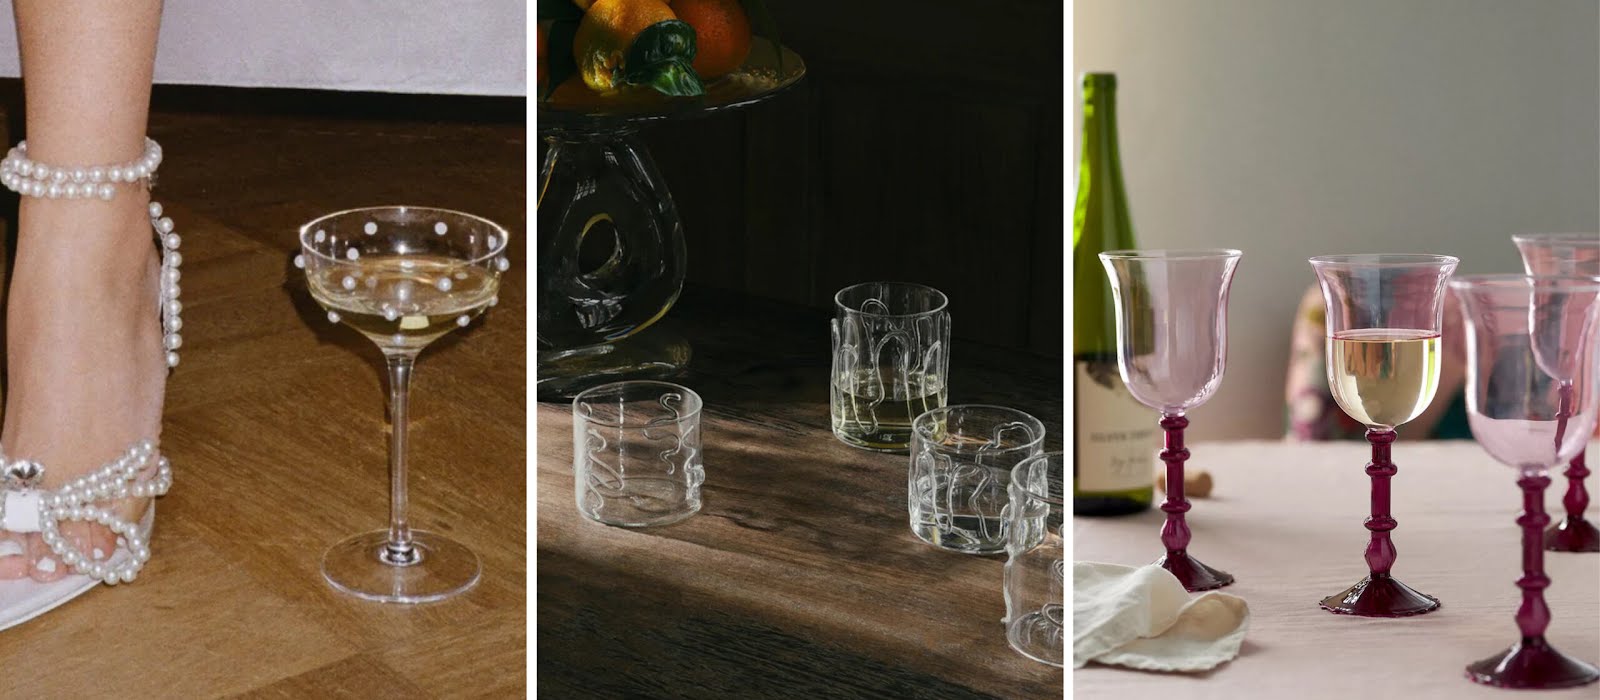 Cheers! Update your glassware with these fun finds